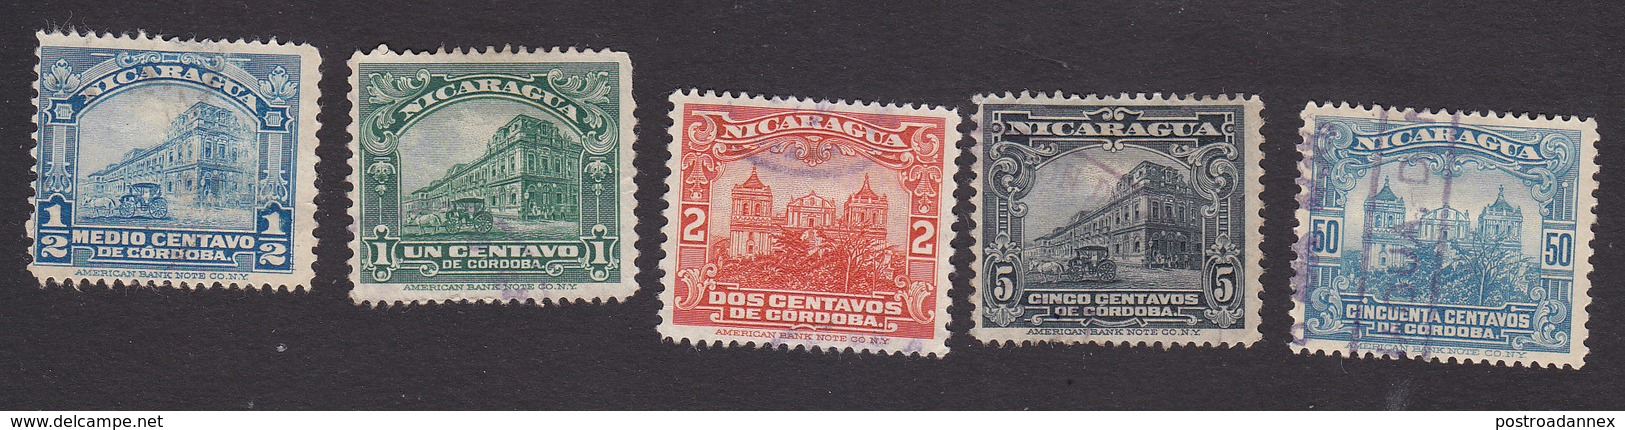 Nicaragua, Scott #349-351, 354, 360, Used, National Palace, Leon Cathedral, Issued 1914 - Nicaragua